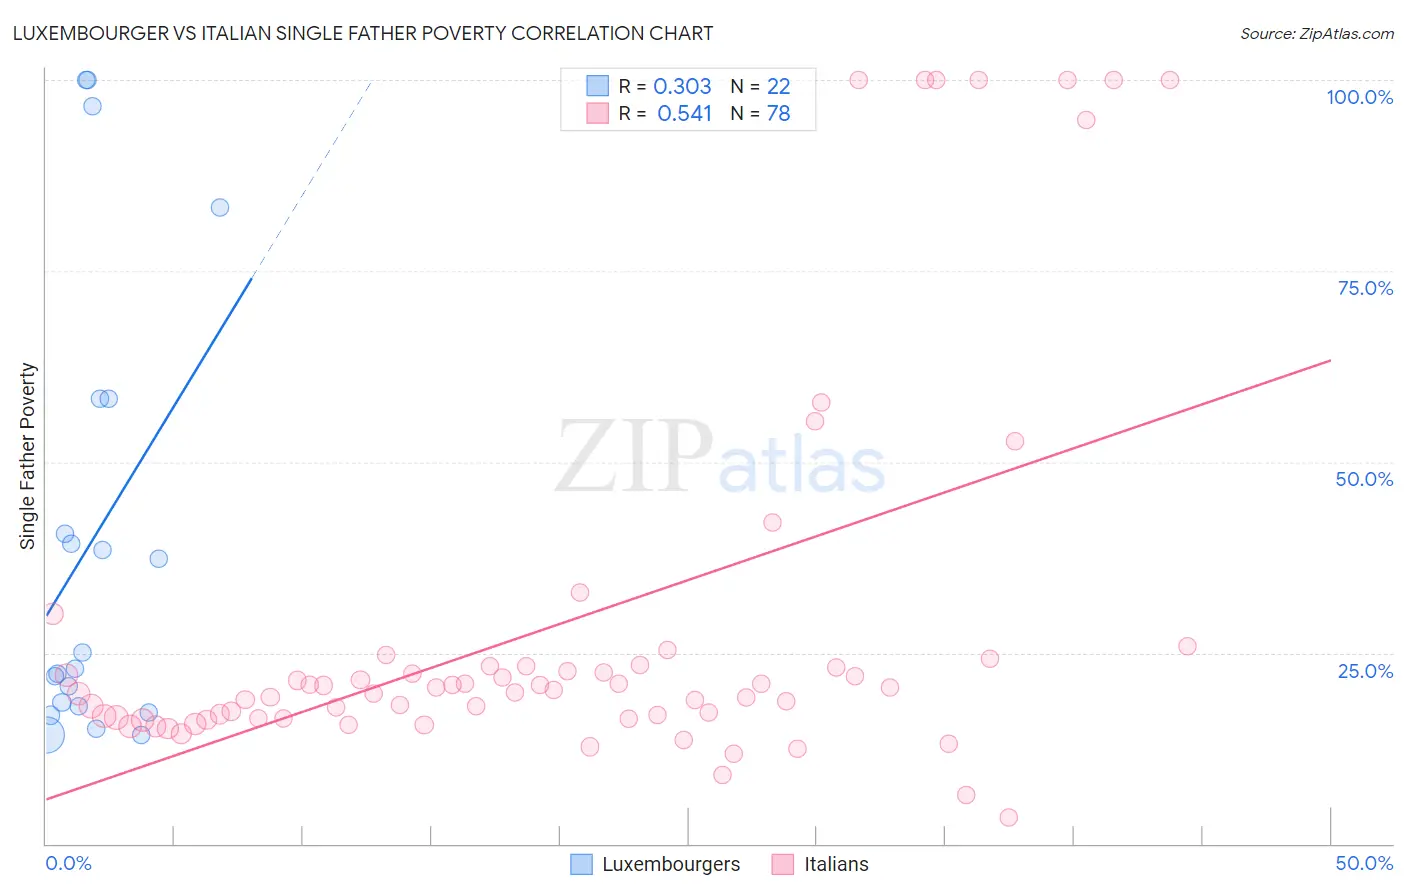 Luxembourger vs Italian Single Father Poverty